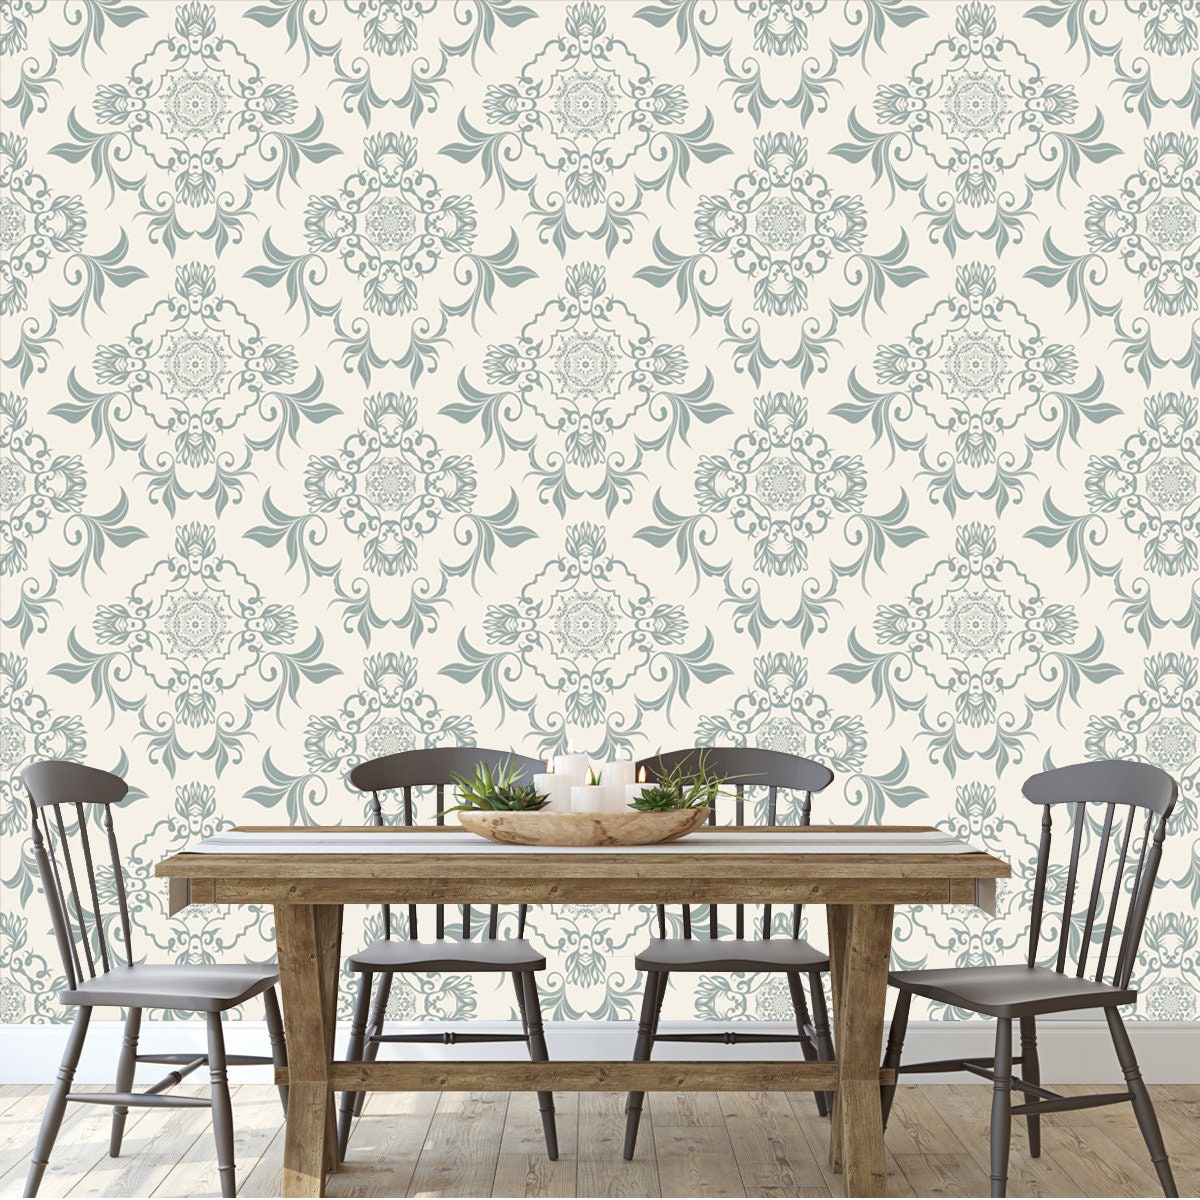 Grey Floral Ornament on Background Wallpaper Dining Room Mural